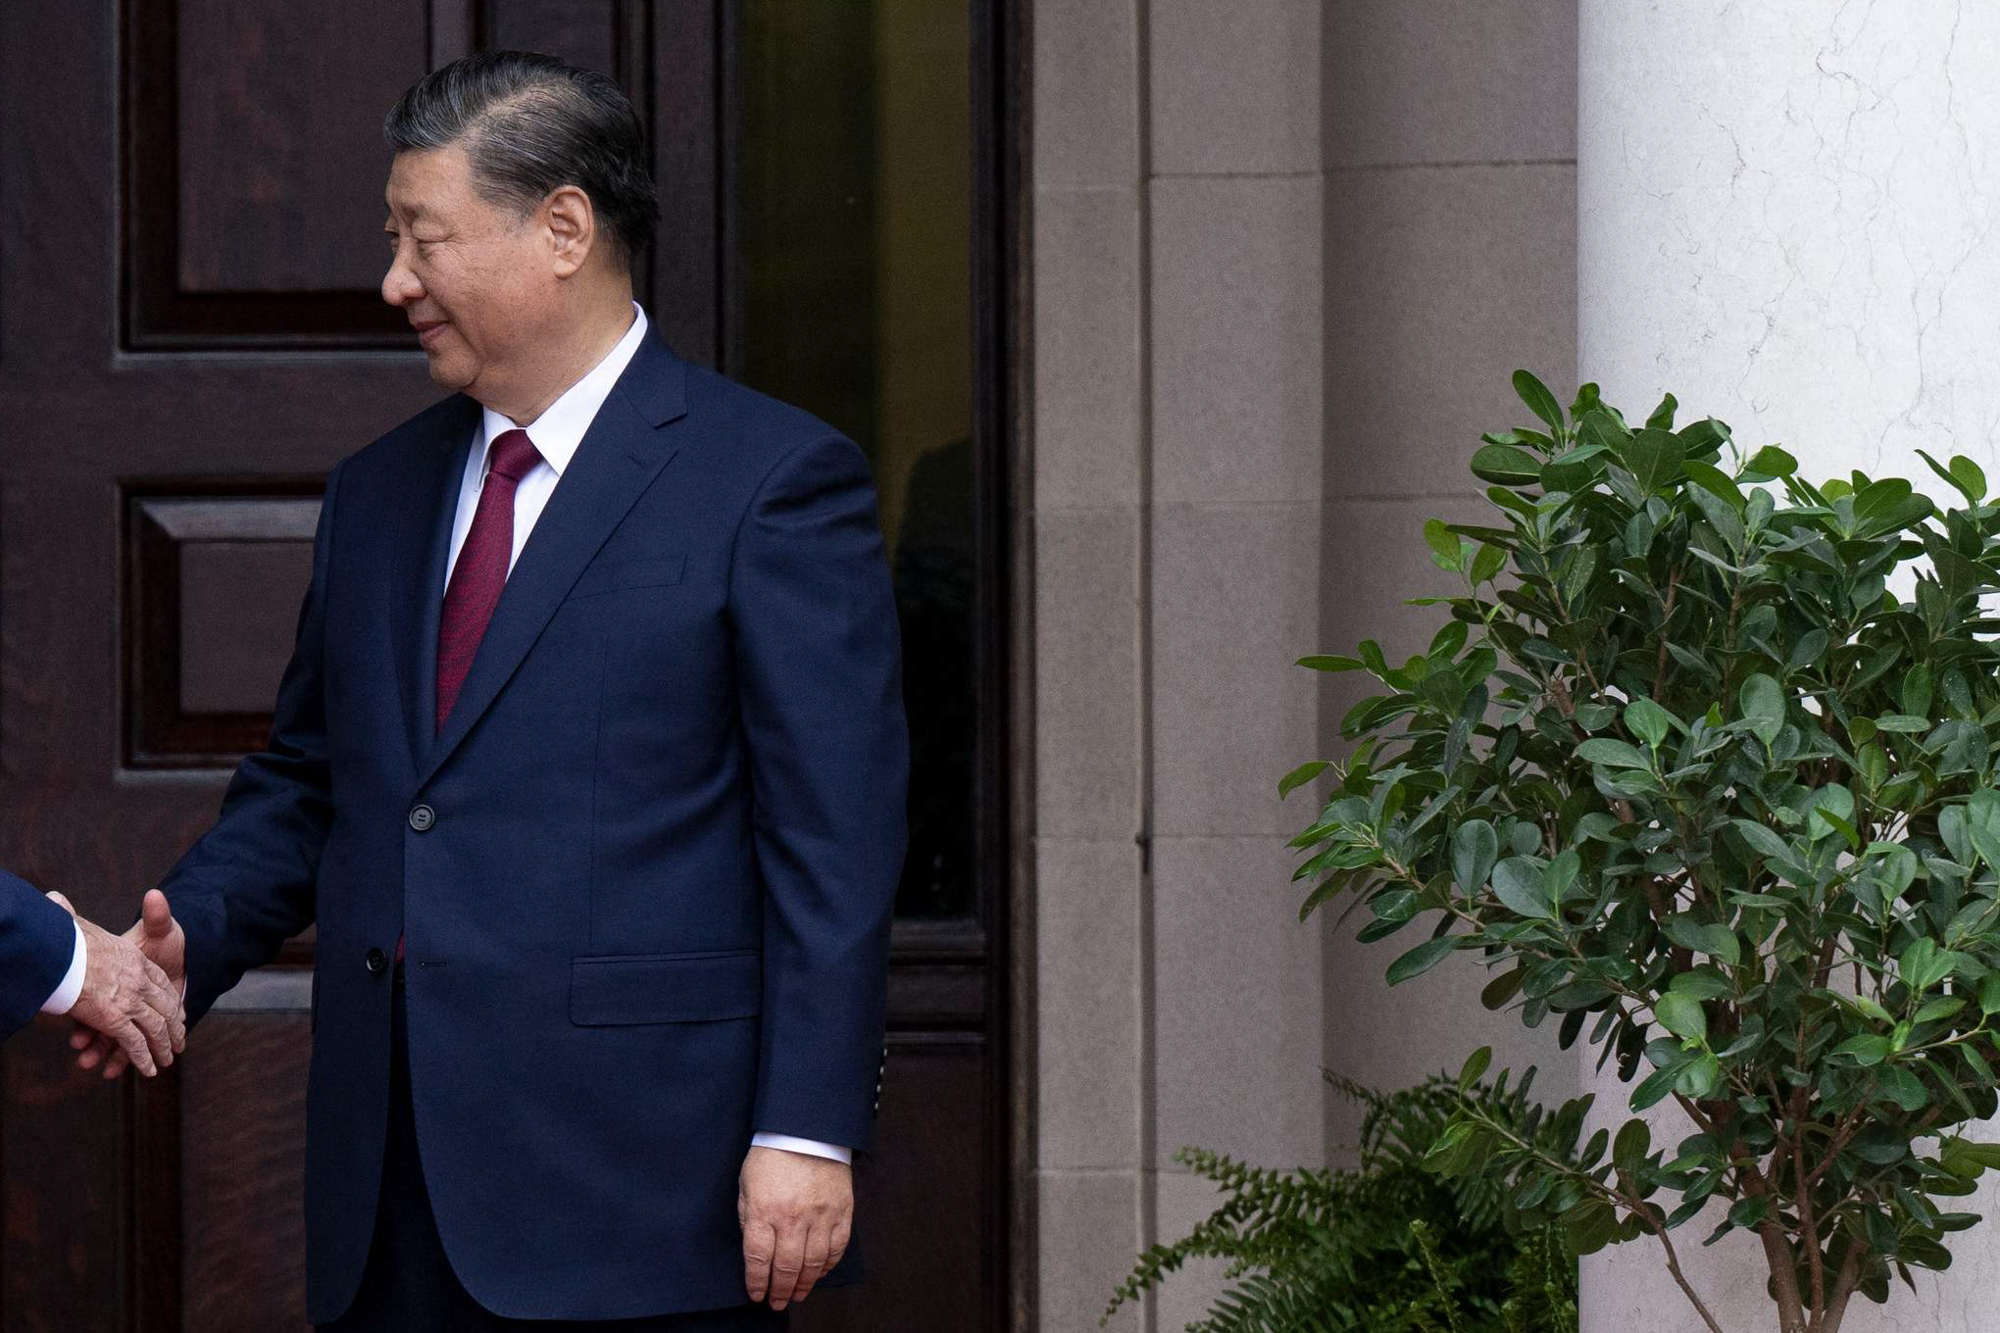 Chinese President Xi Jinping shaking a person's hand.